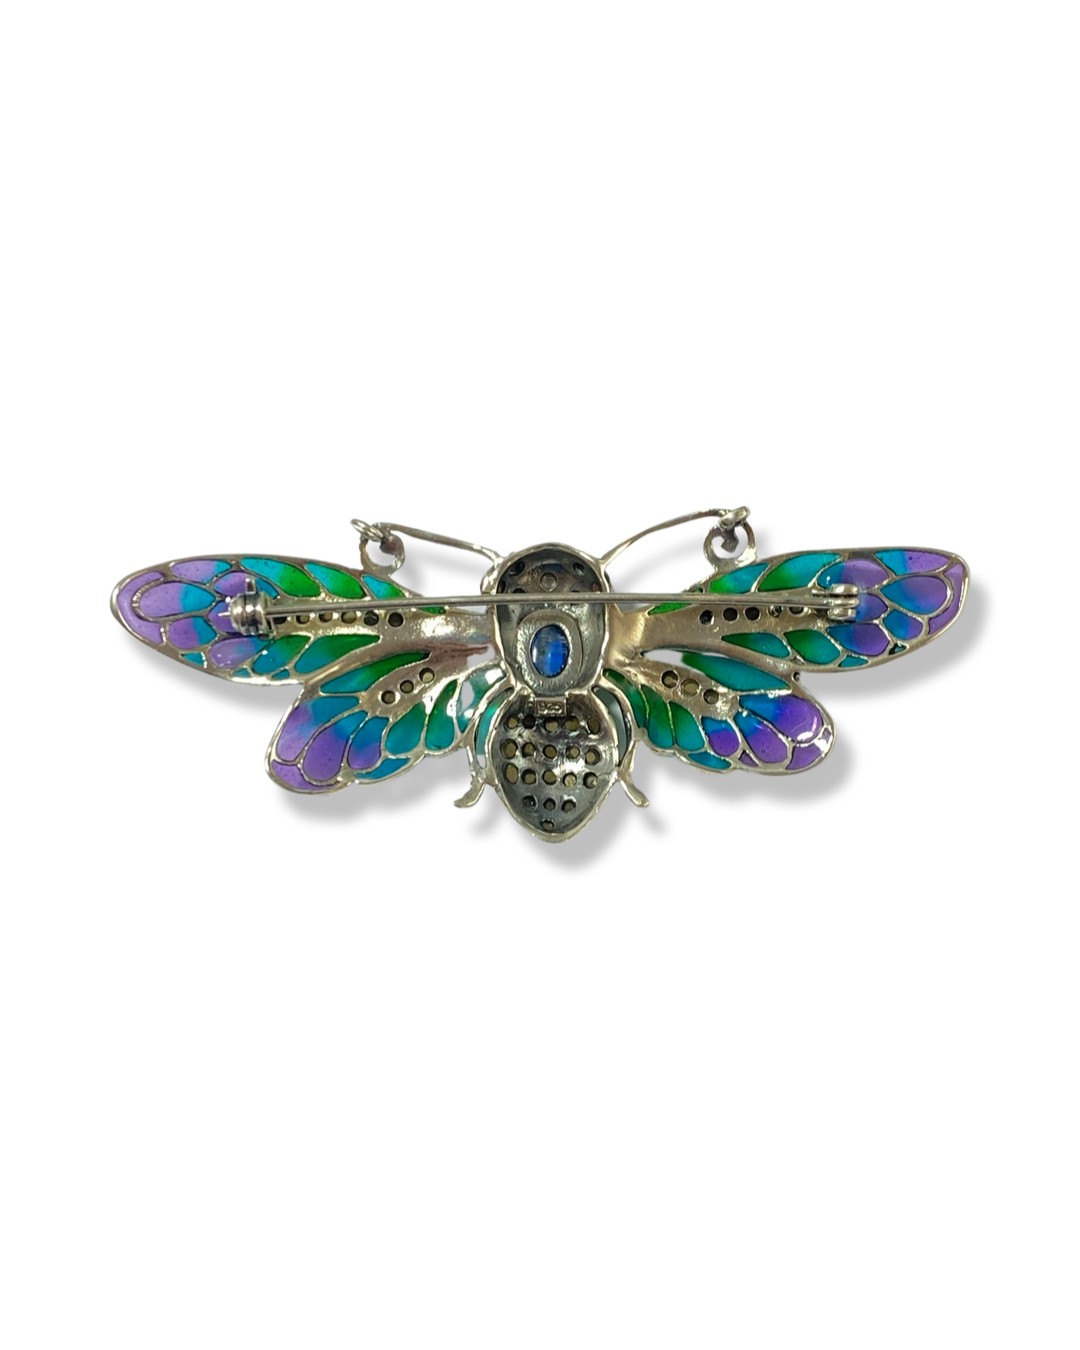 Silver, Plique a Jour and marcasite Bee brooch weighing 10.28 grams, measuring 7.5cm in length and - Image 2 of 2